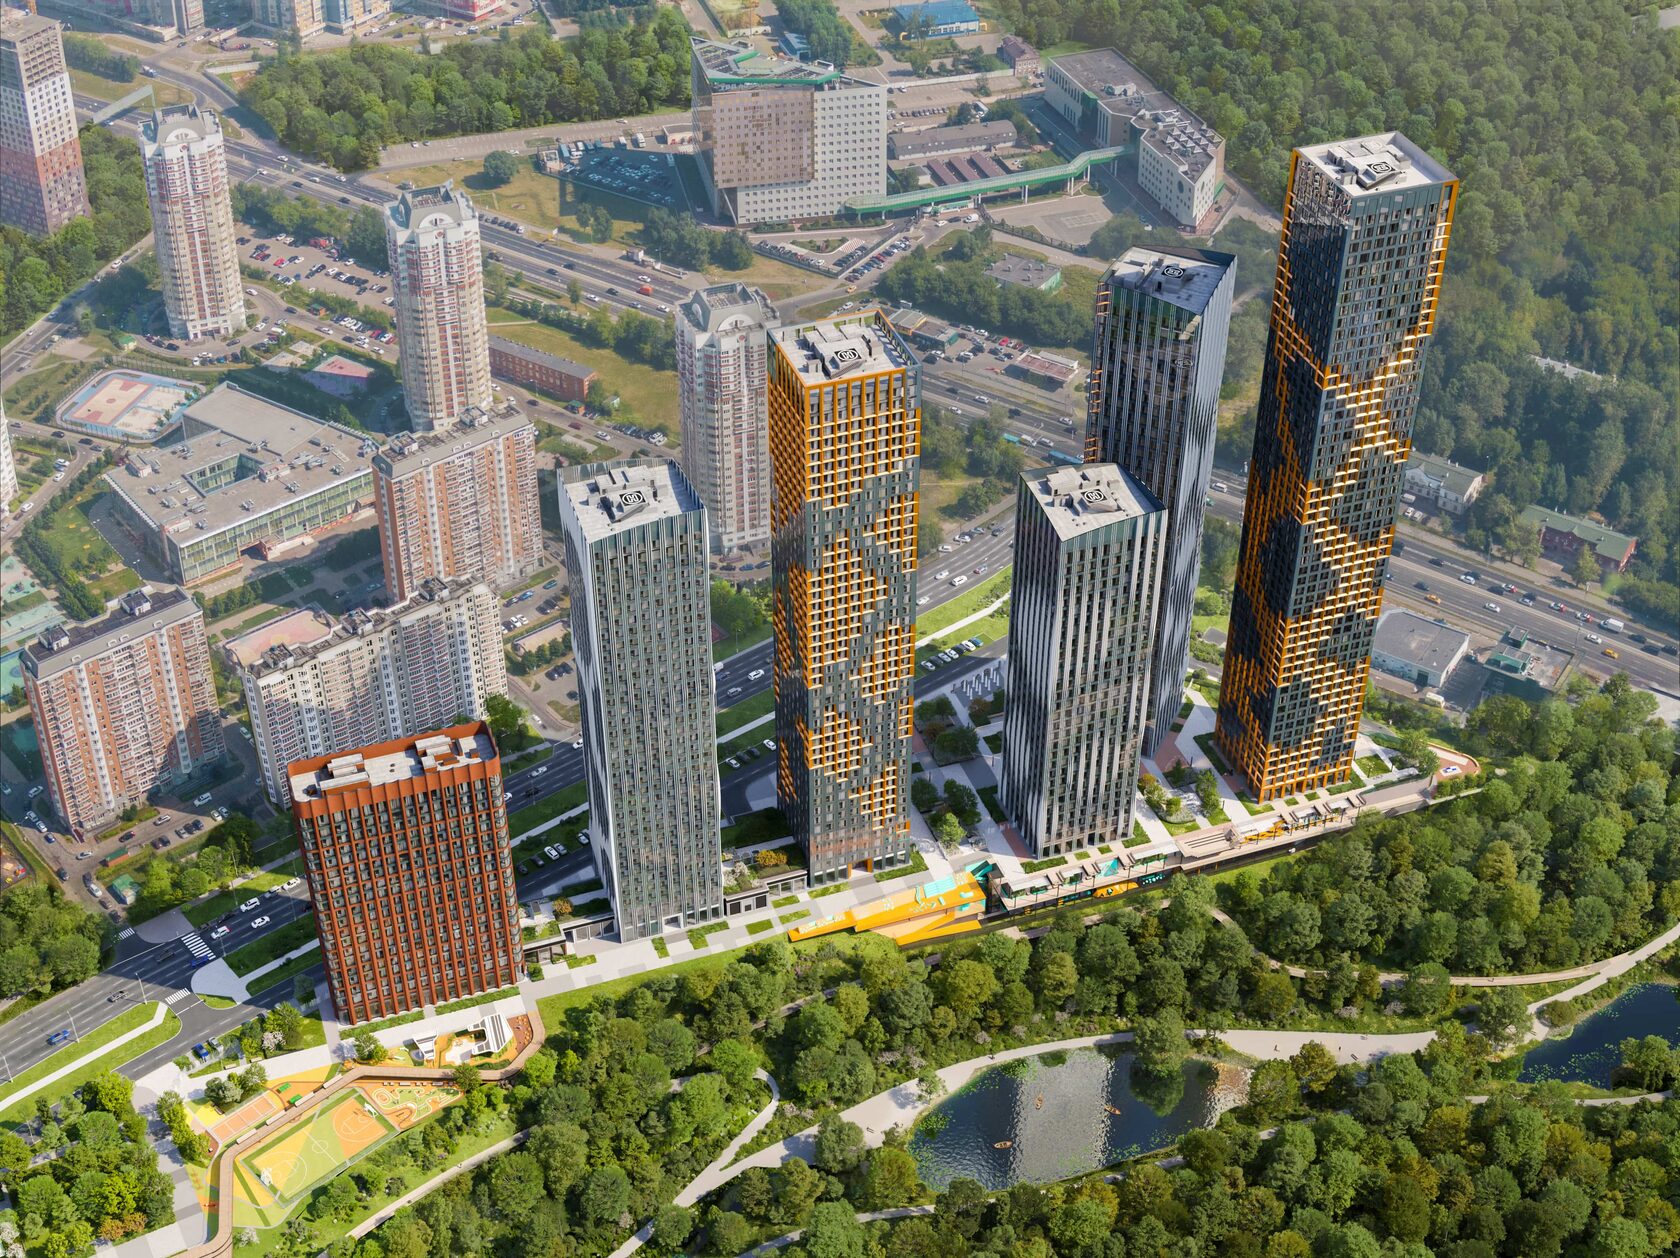 Commercial visualization of the architectural project of the residential complex in Moscow Level Michurinsky